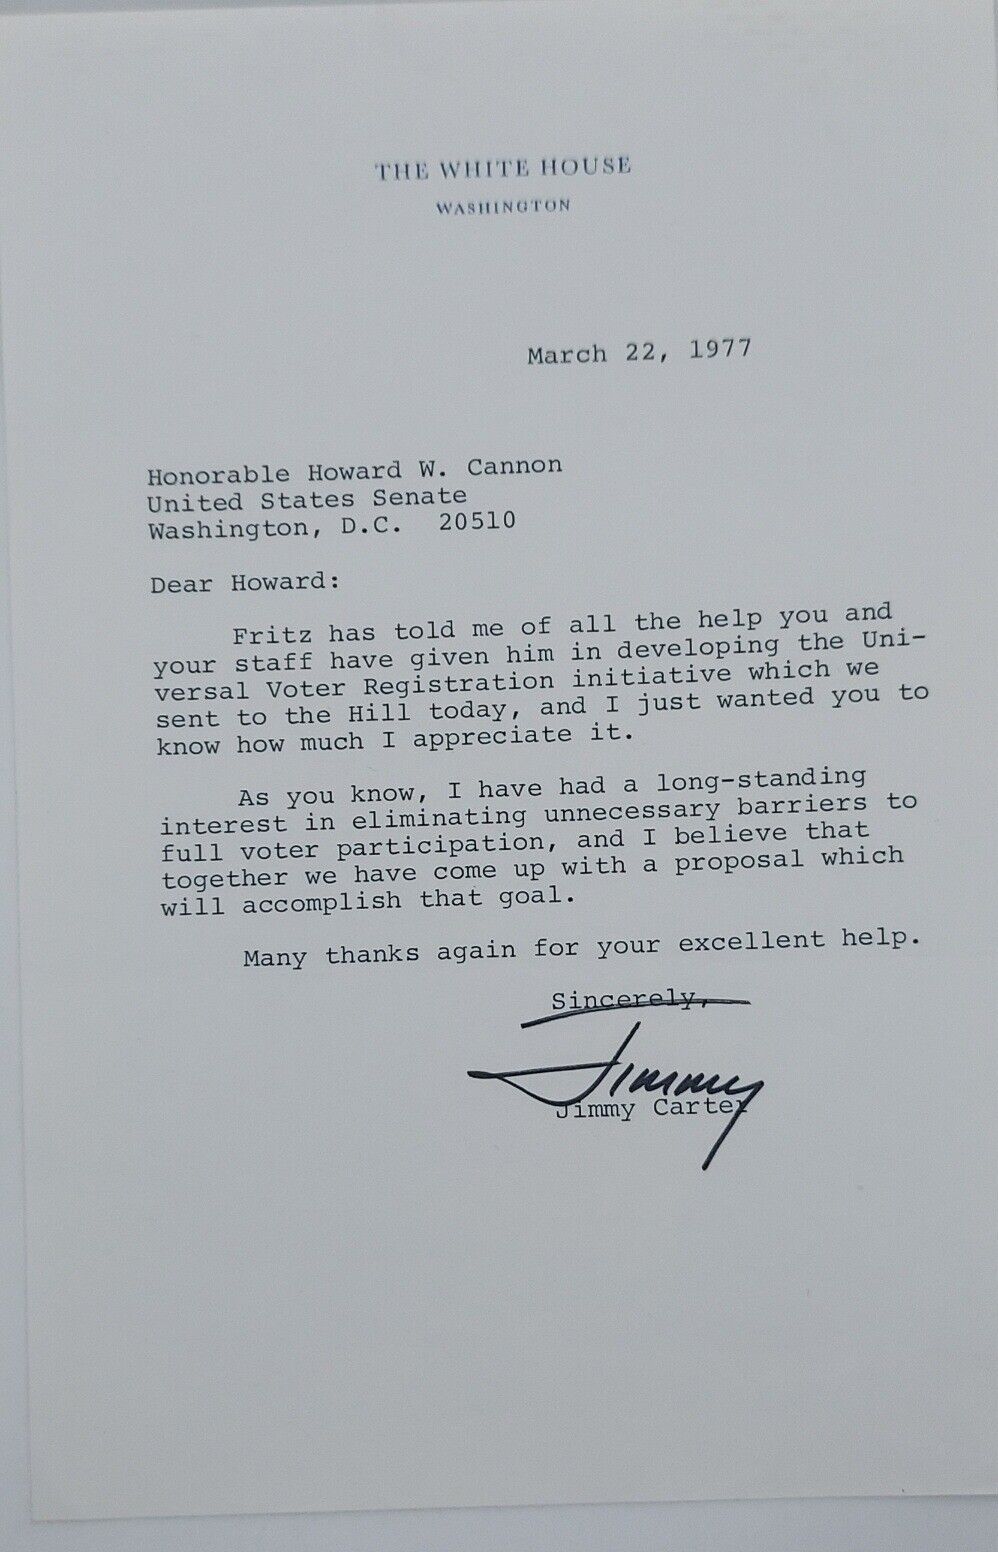 Jimmy Carter Signed 1977 White House Letter To Howard Cannon Autographed